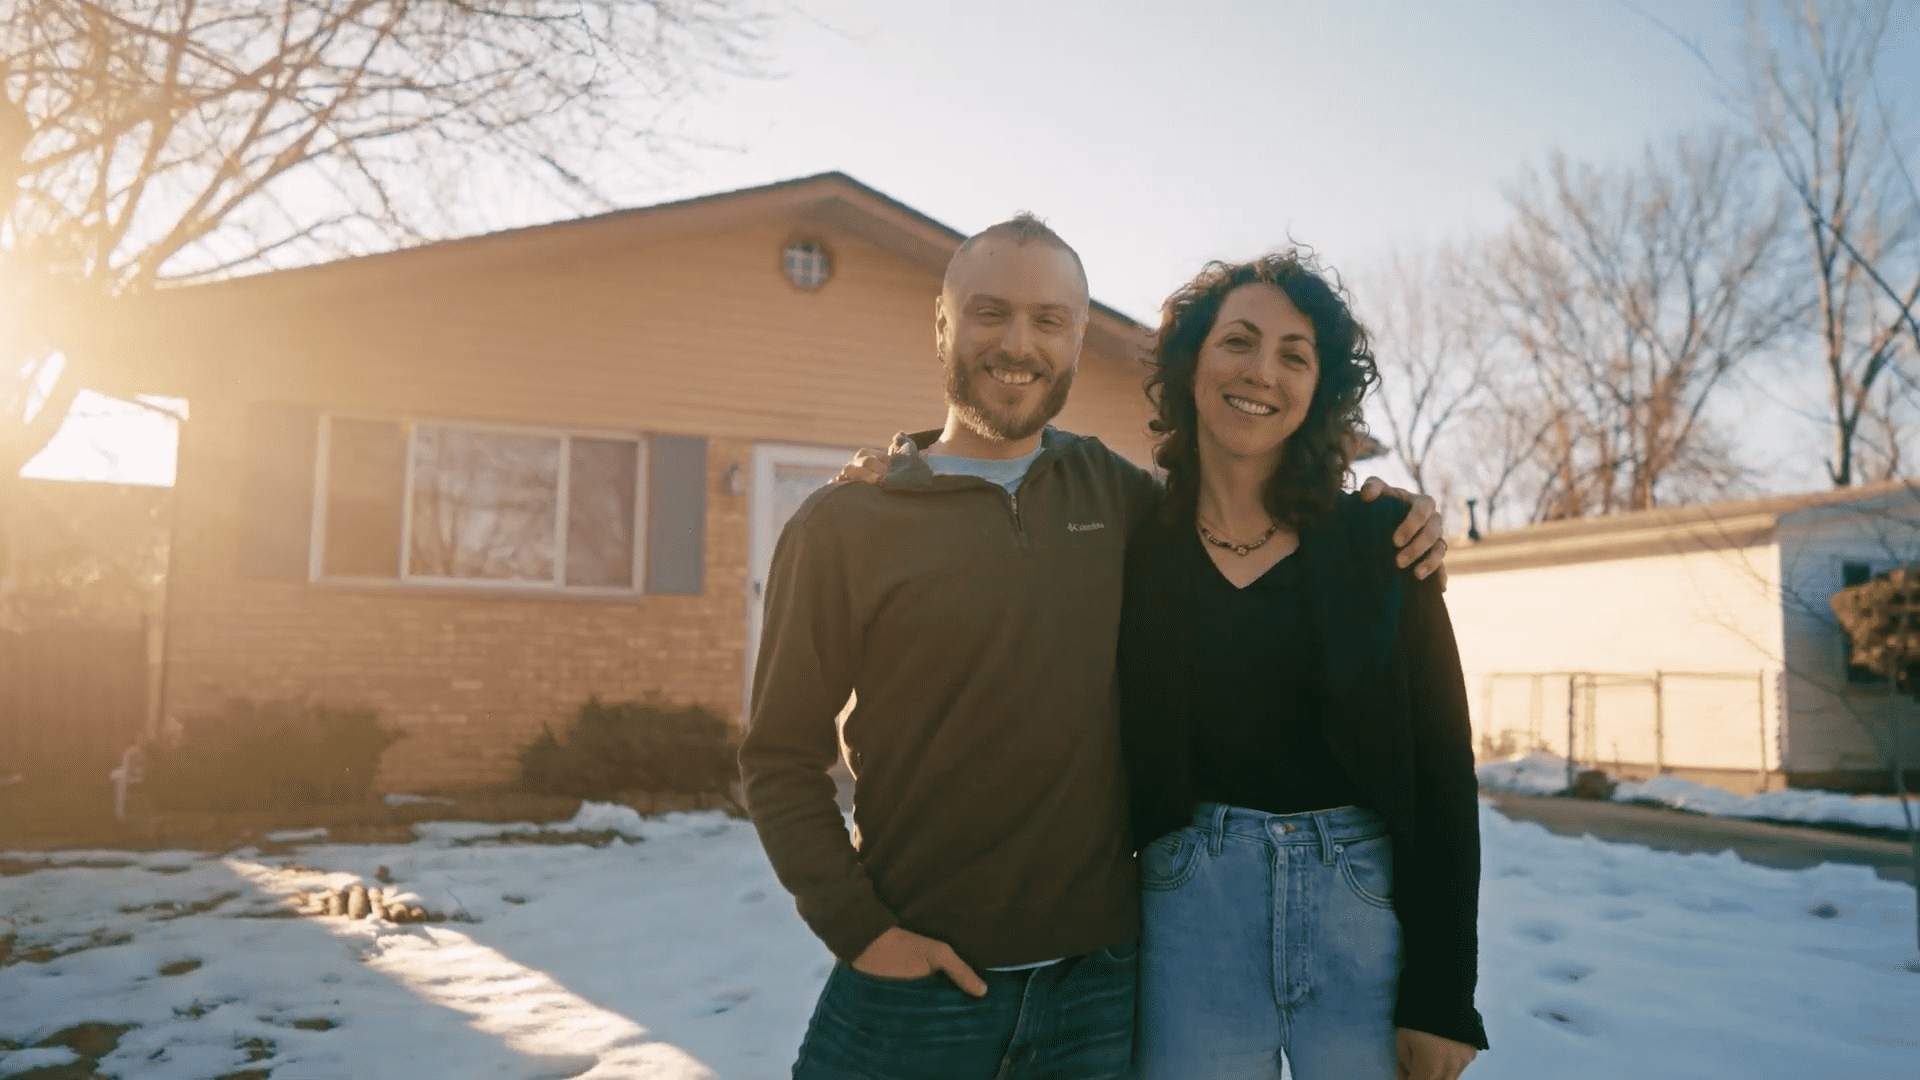 Two people smile at the camera while standing side-by-side on the snow-covered yard in front of their home.